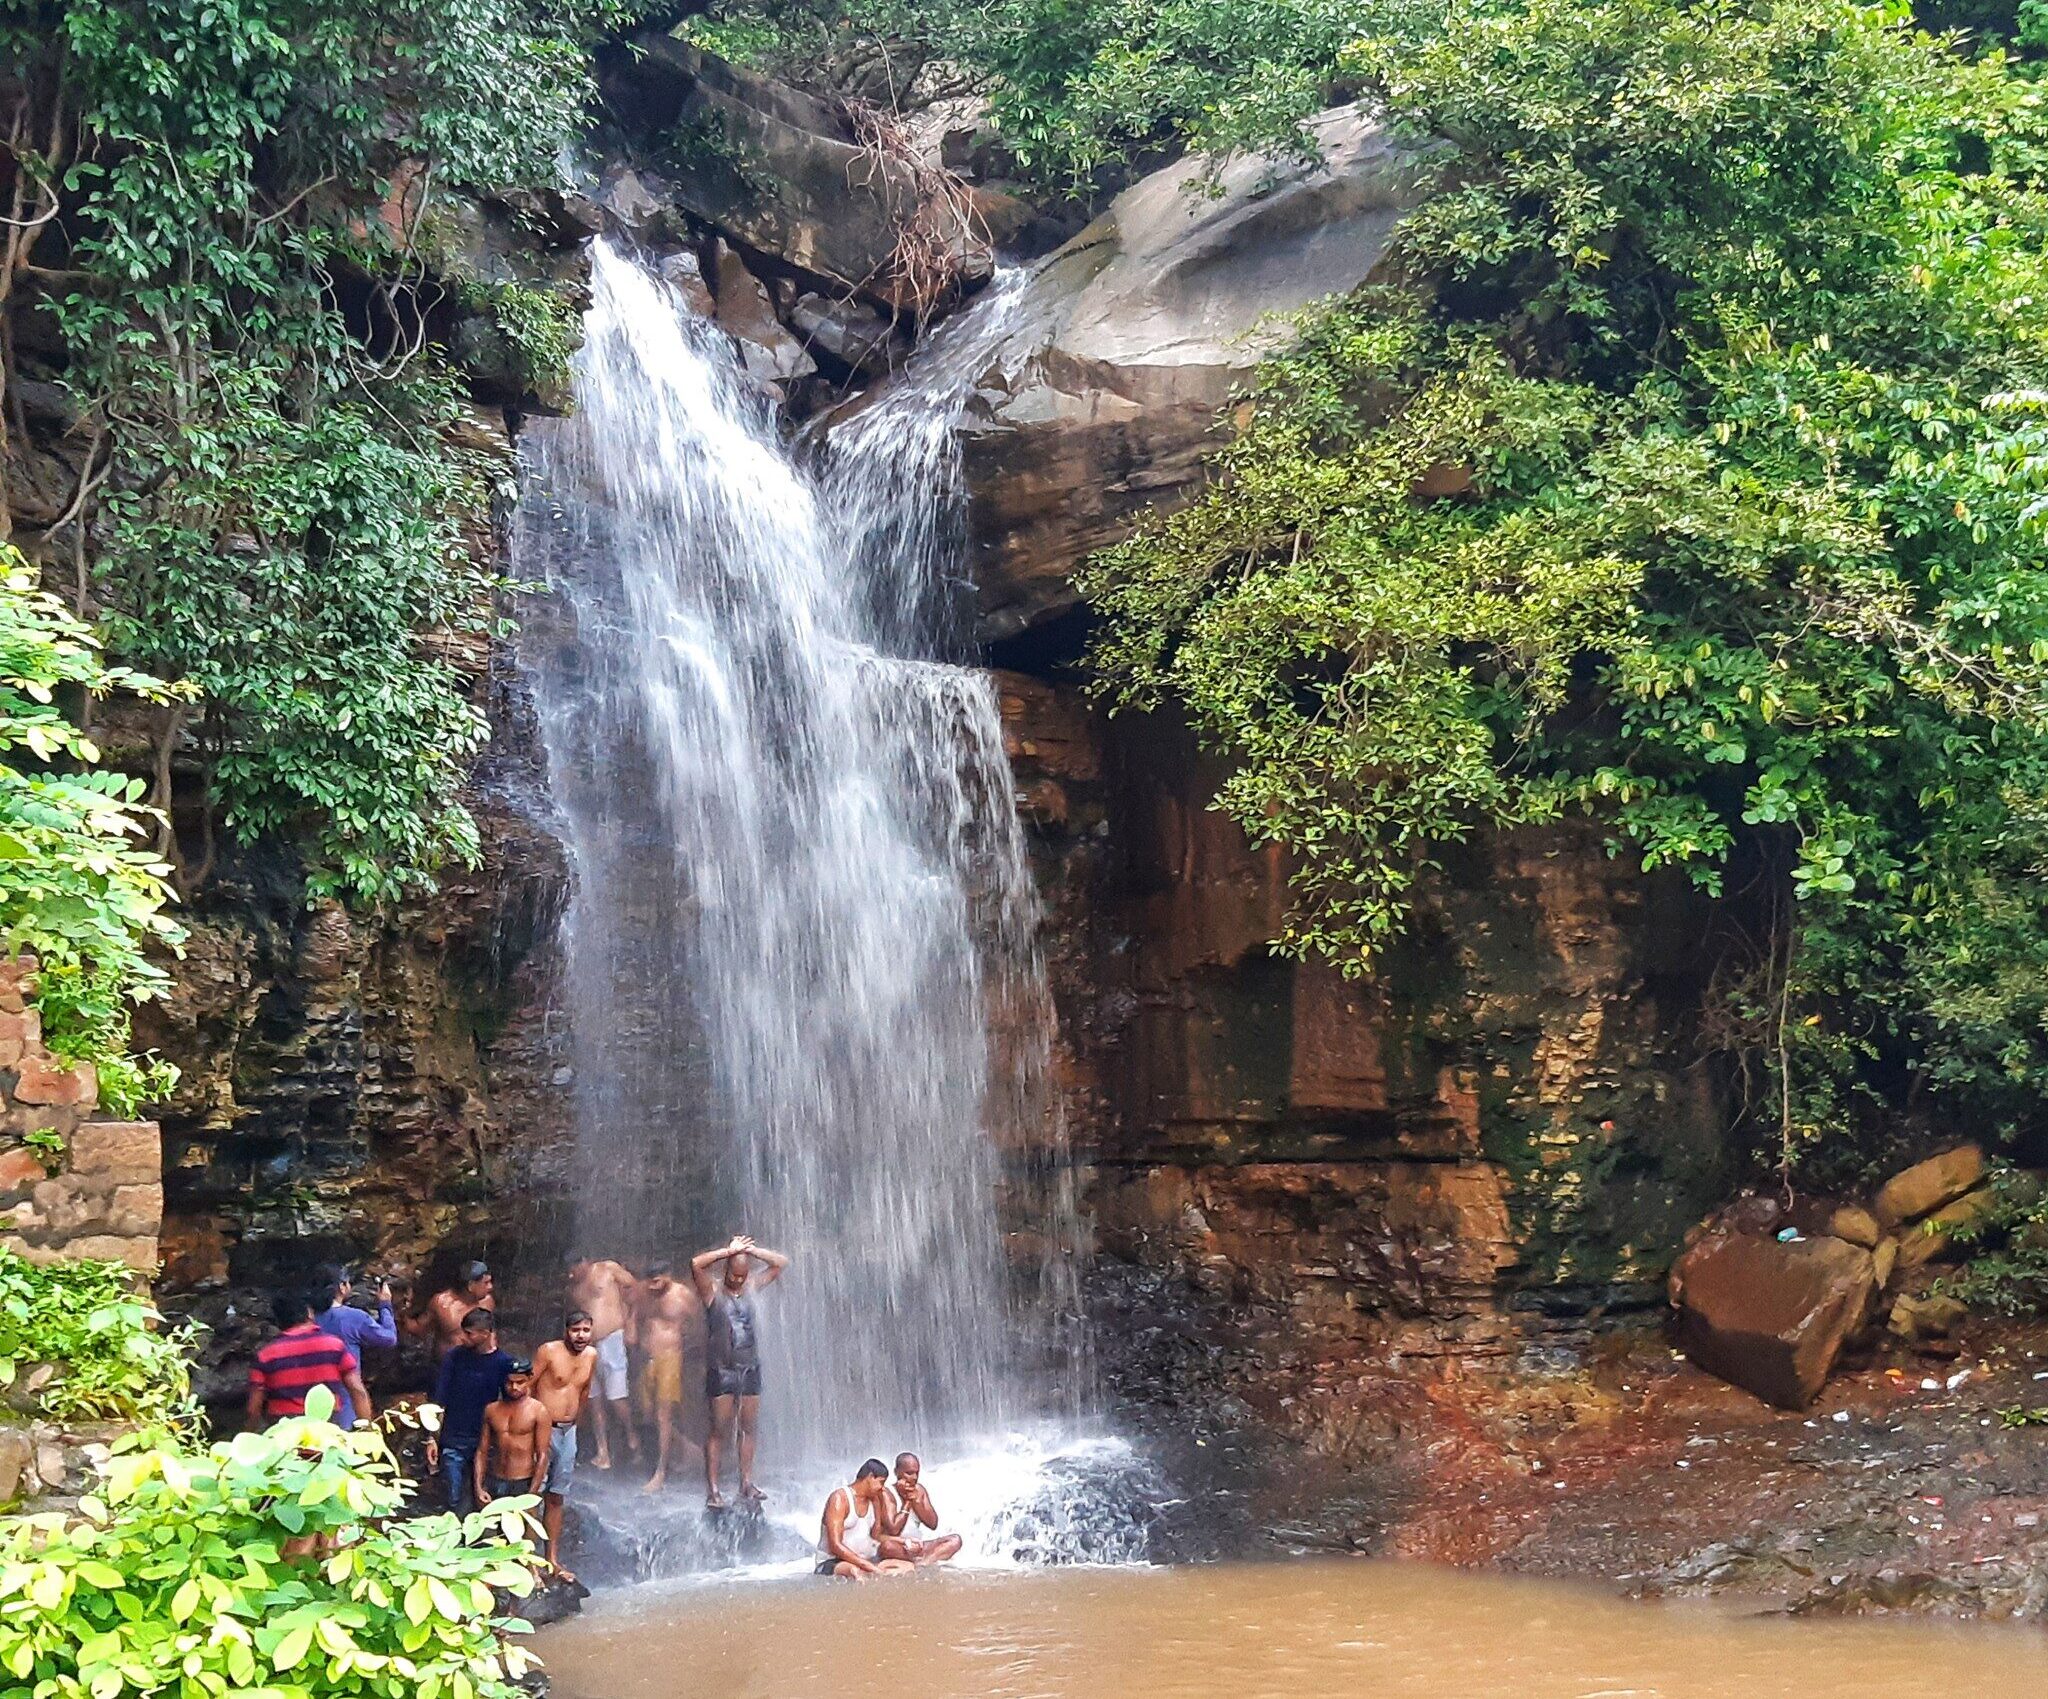 Kashish Falls has been attracting nature lovers over the years